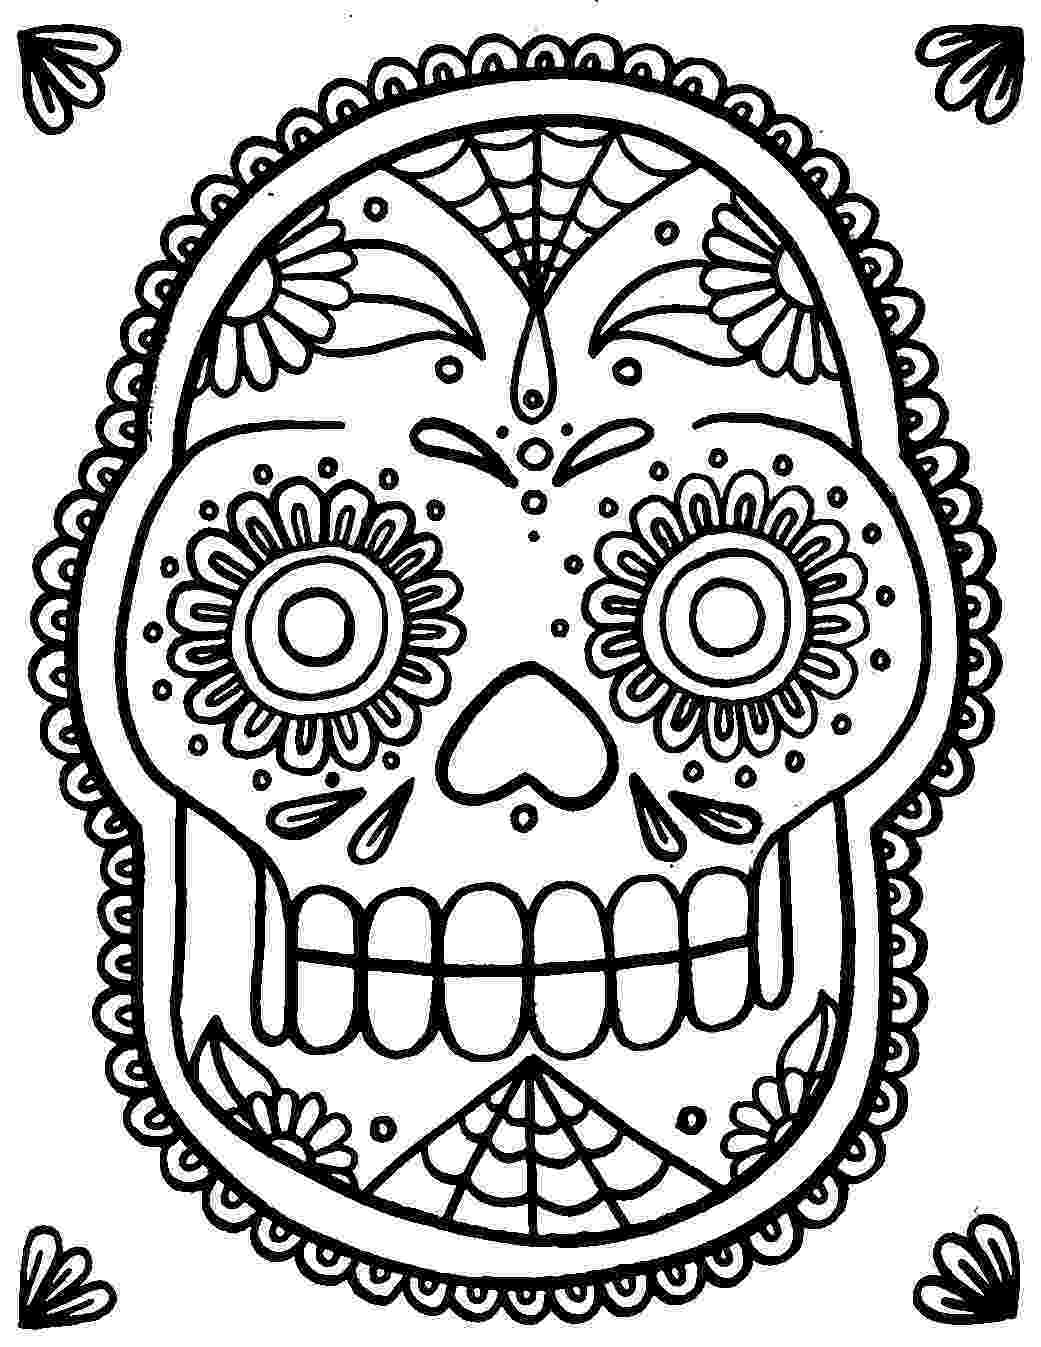 skull coloring pages printable yucca flats nm wenchkin39s coloring pages sugar skull skull pages coloring printable 